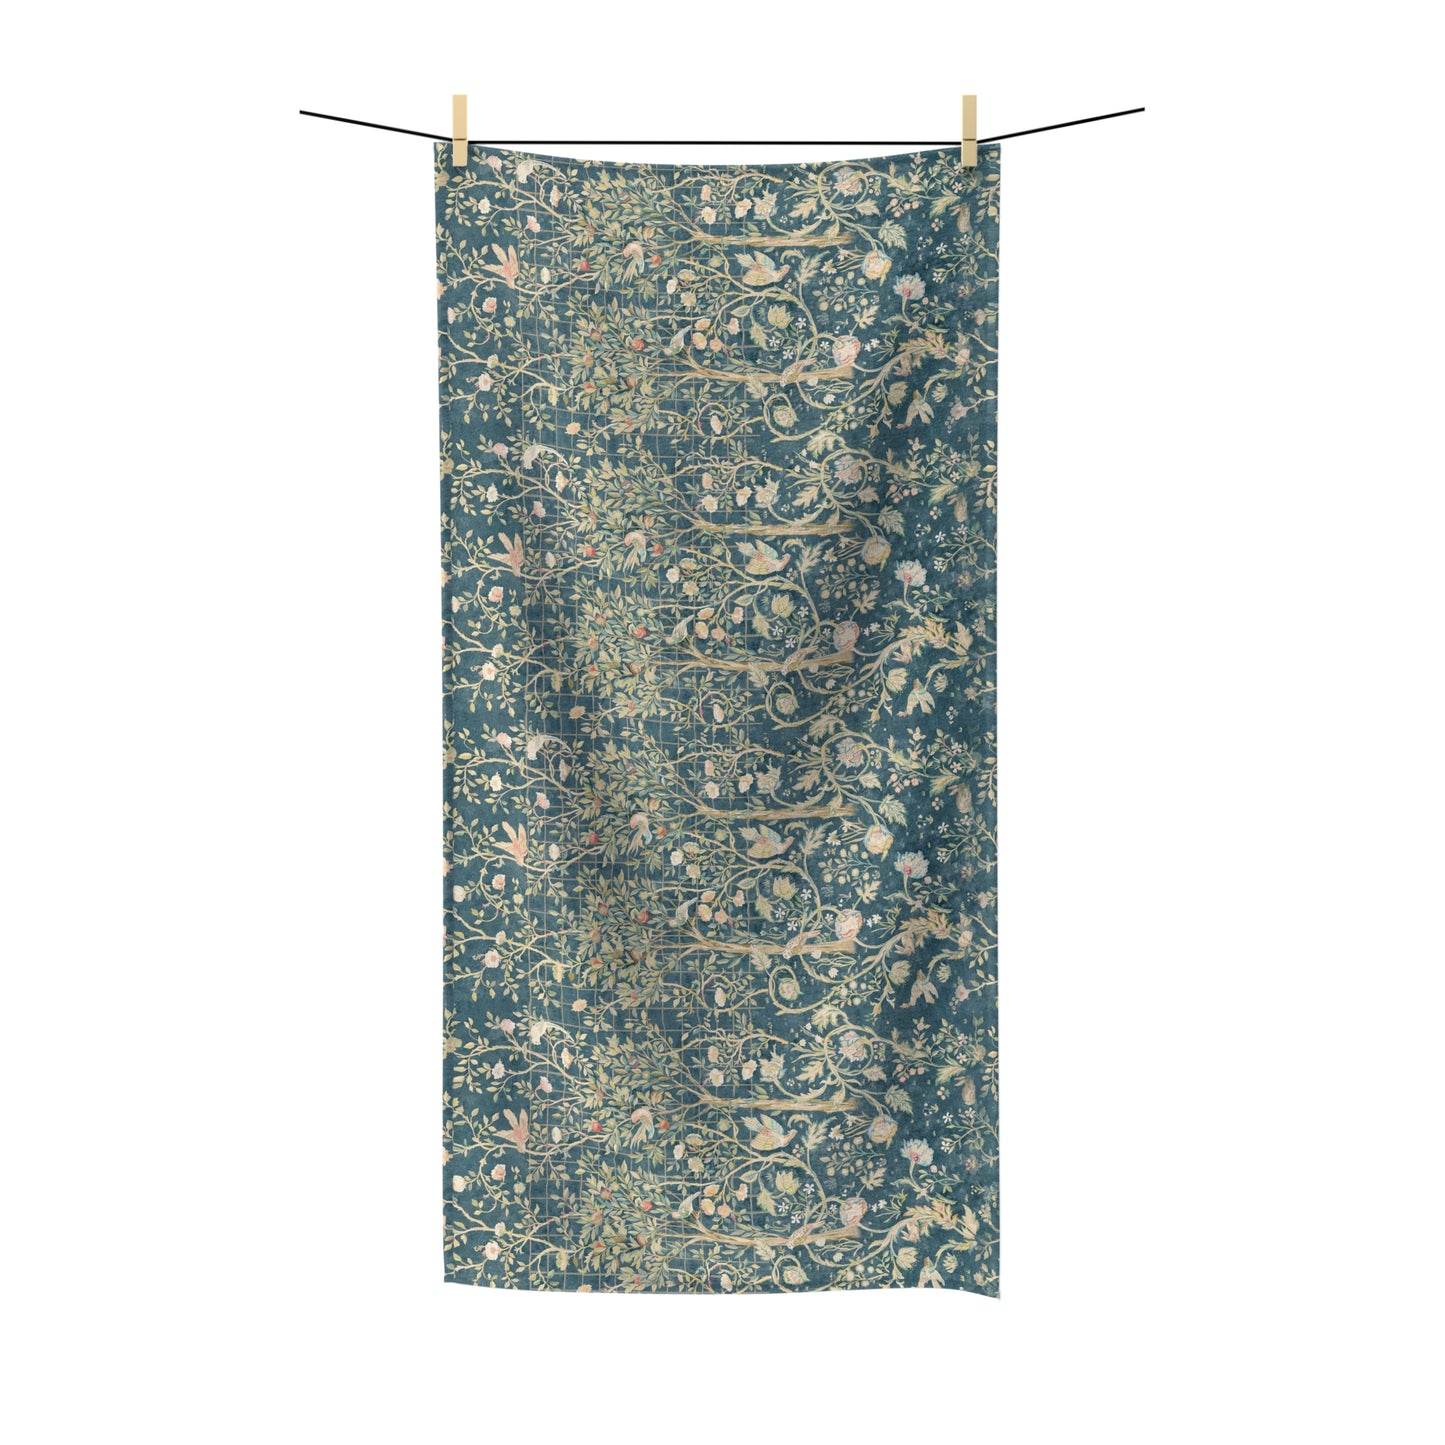 William Morris & Co Luxury Polycotton Towel - Melsetter Collection